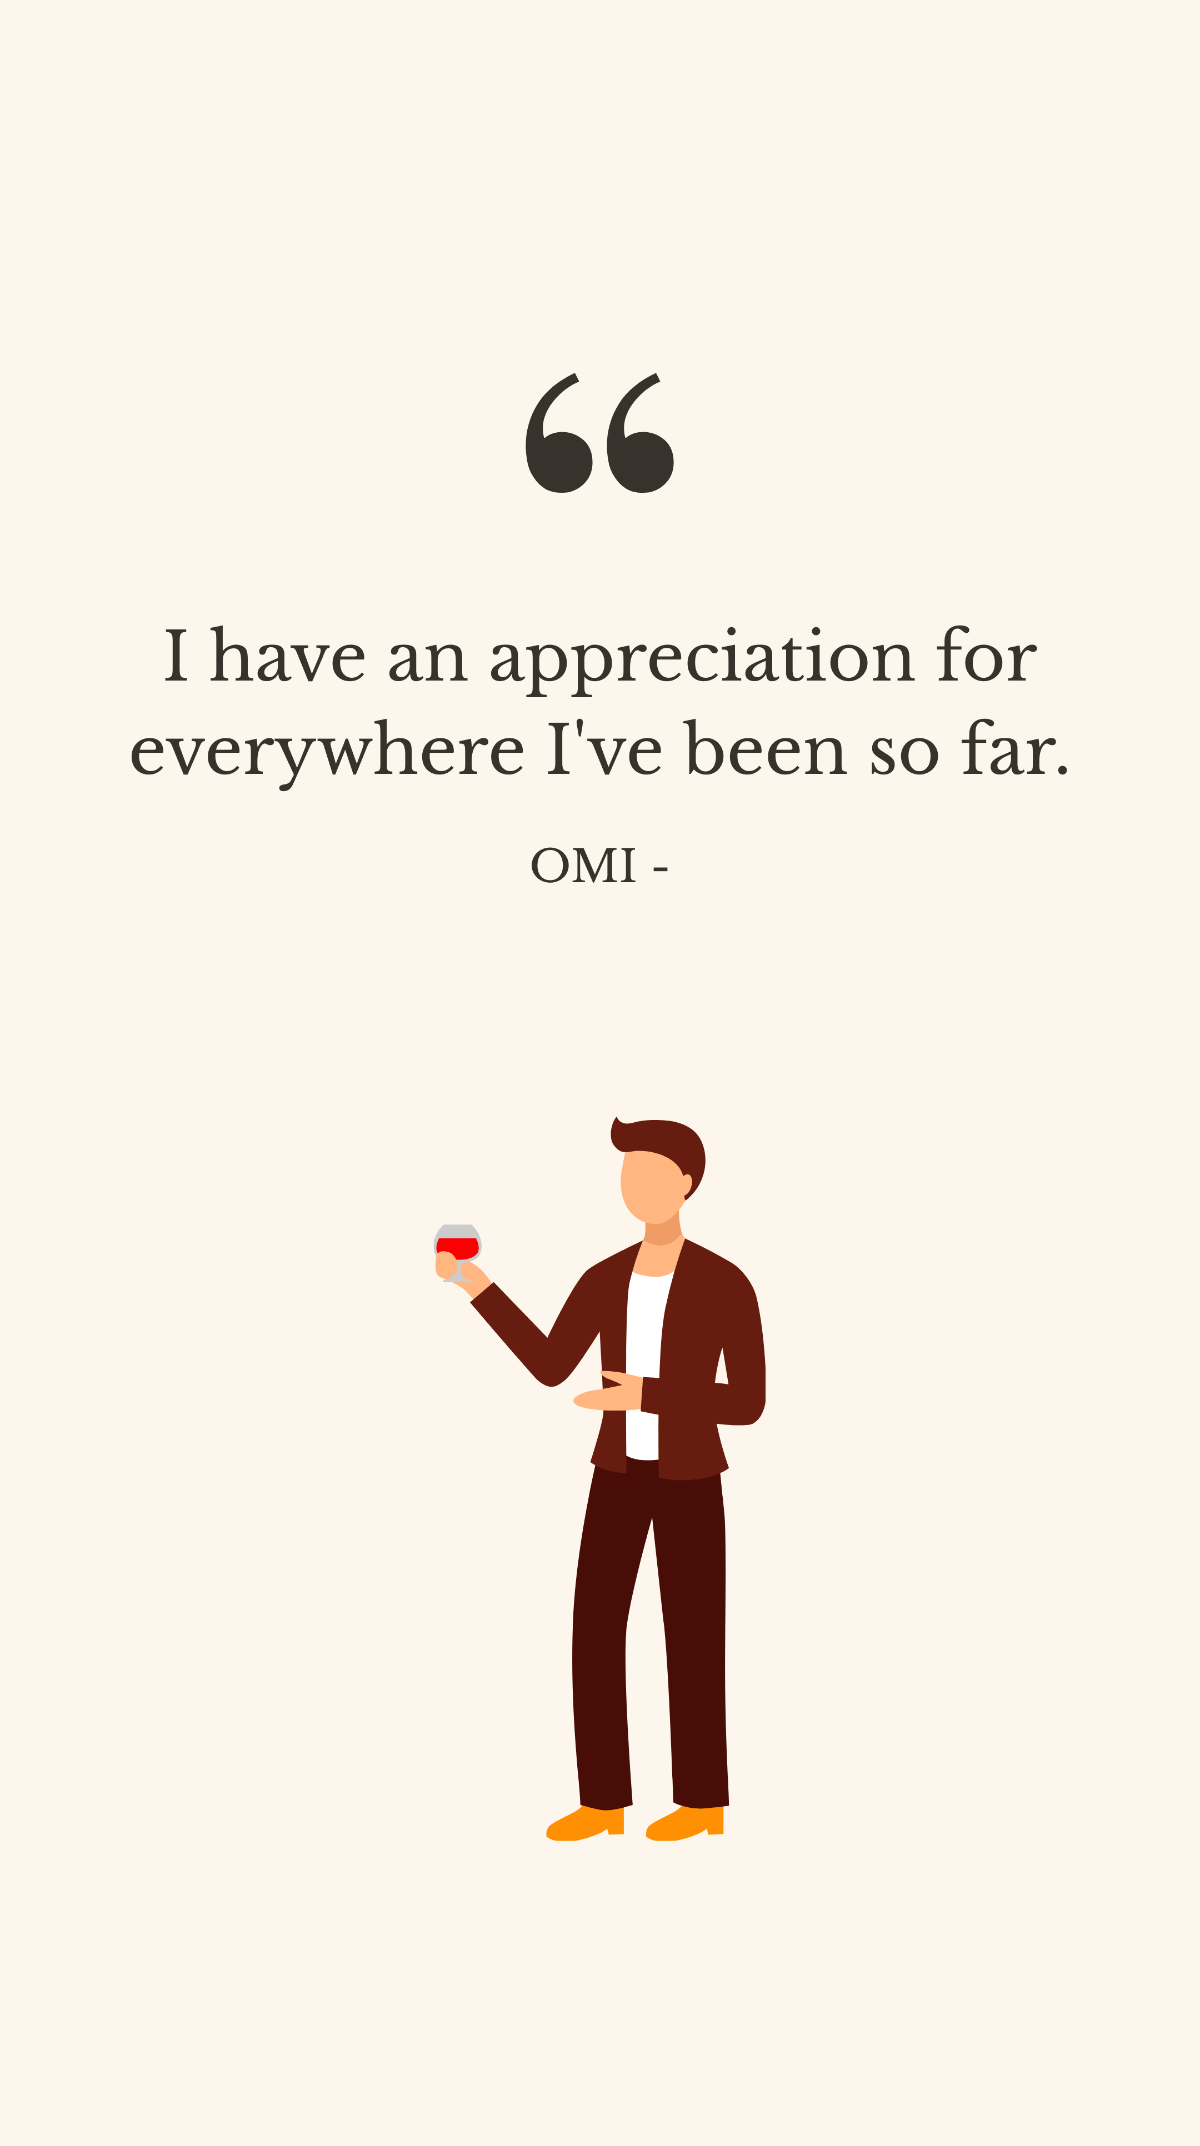 OMI - I have an appreciation for everywhere I've been so far.